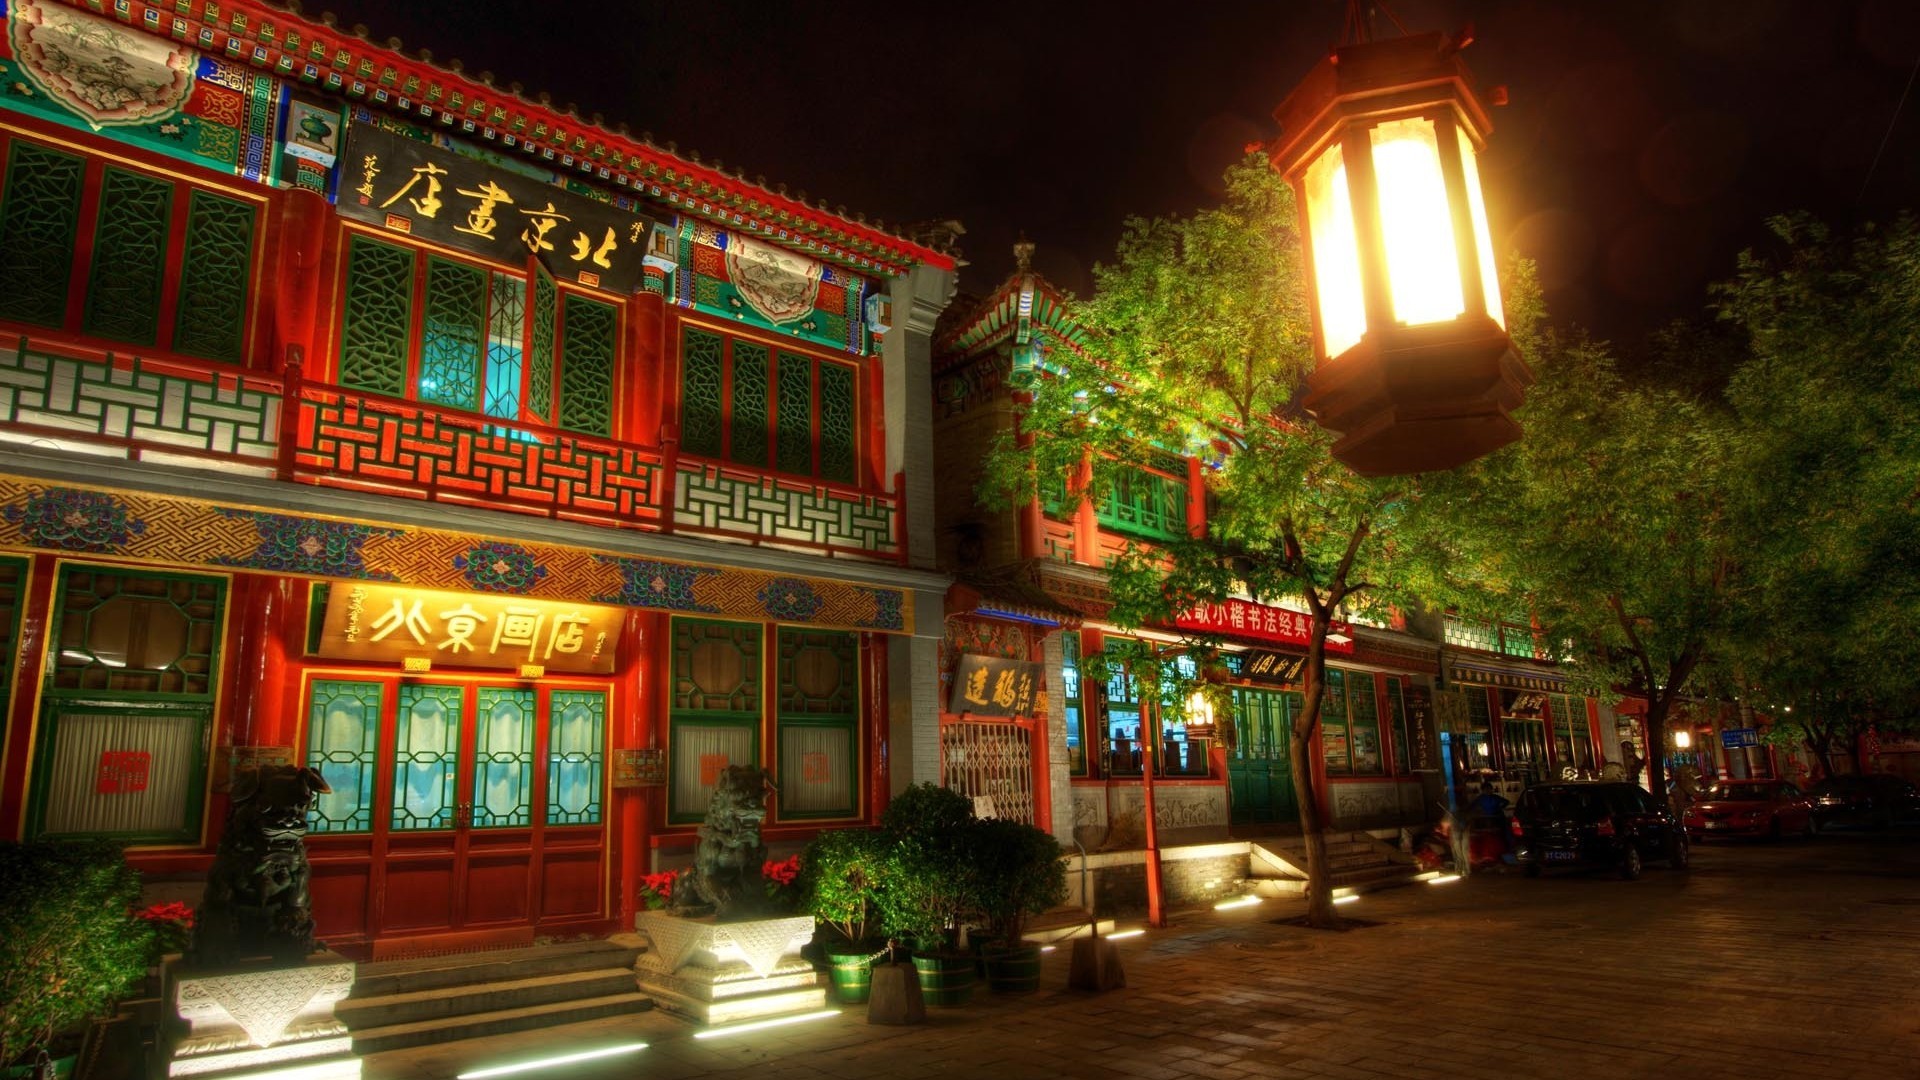 General 1920x1080 architecture cityscape city capital building street Beijing Asian architecture lamp trees night lights sculpture China Asia